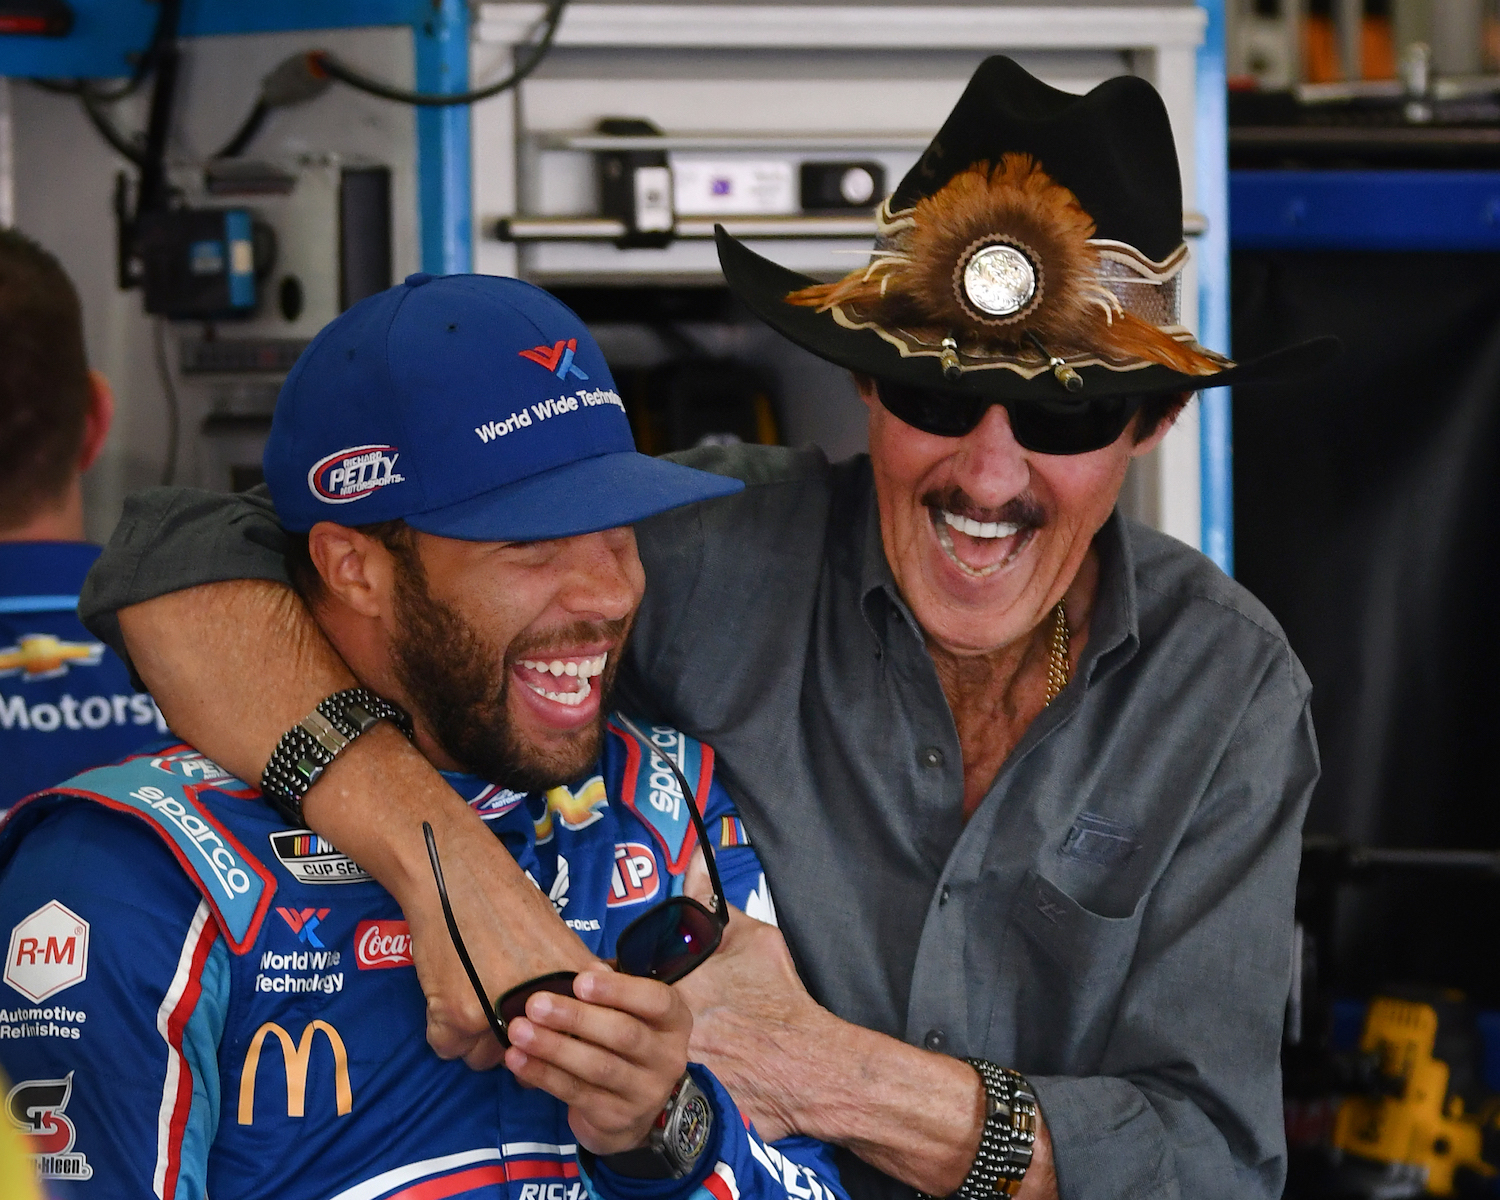 NASCAR Cup Series driver Bubba Wallace with car owner Richard Petty